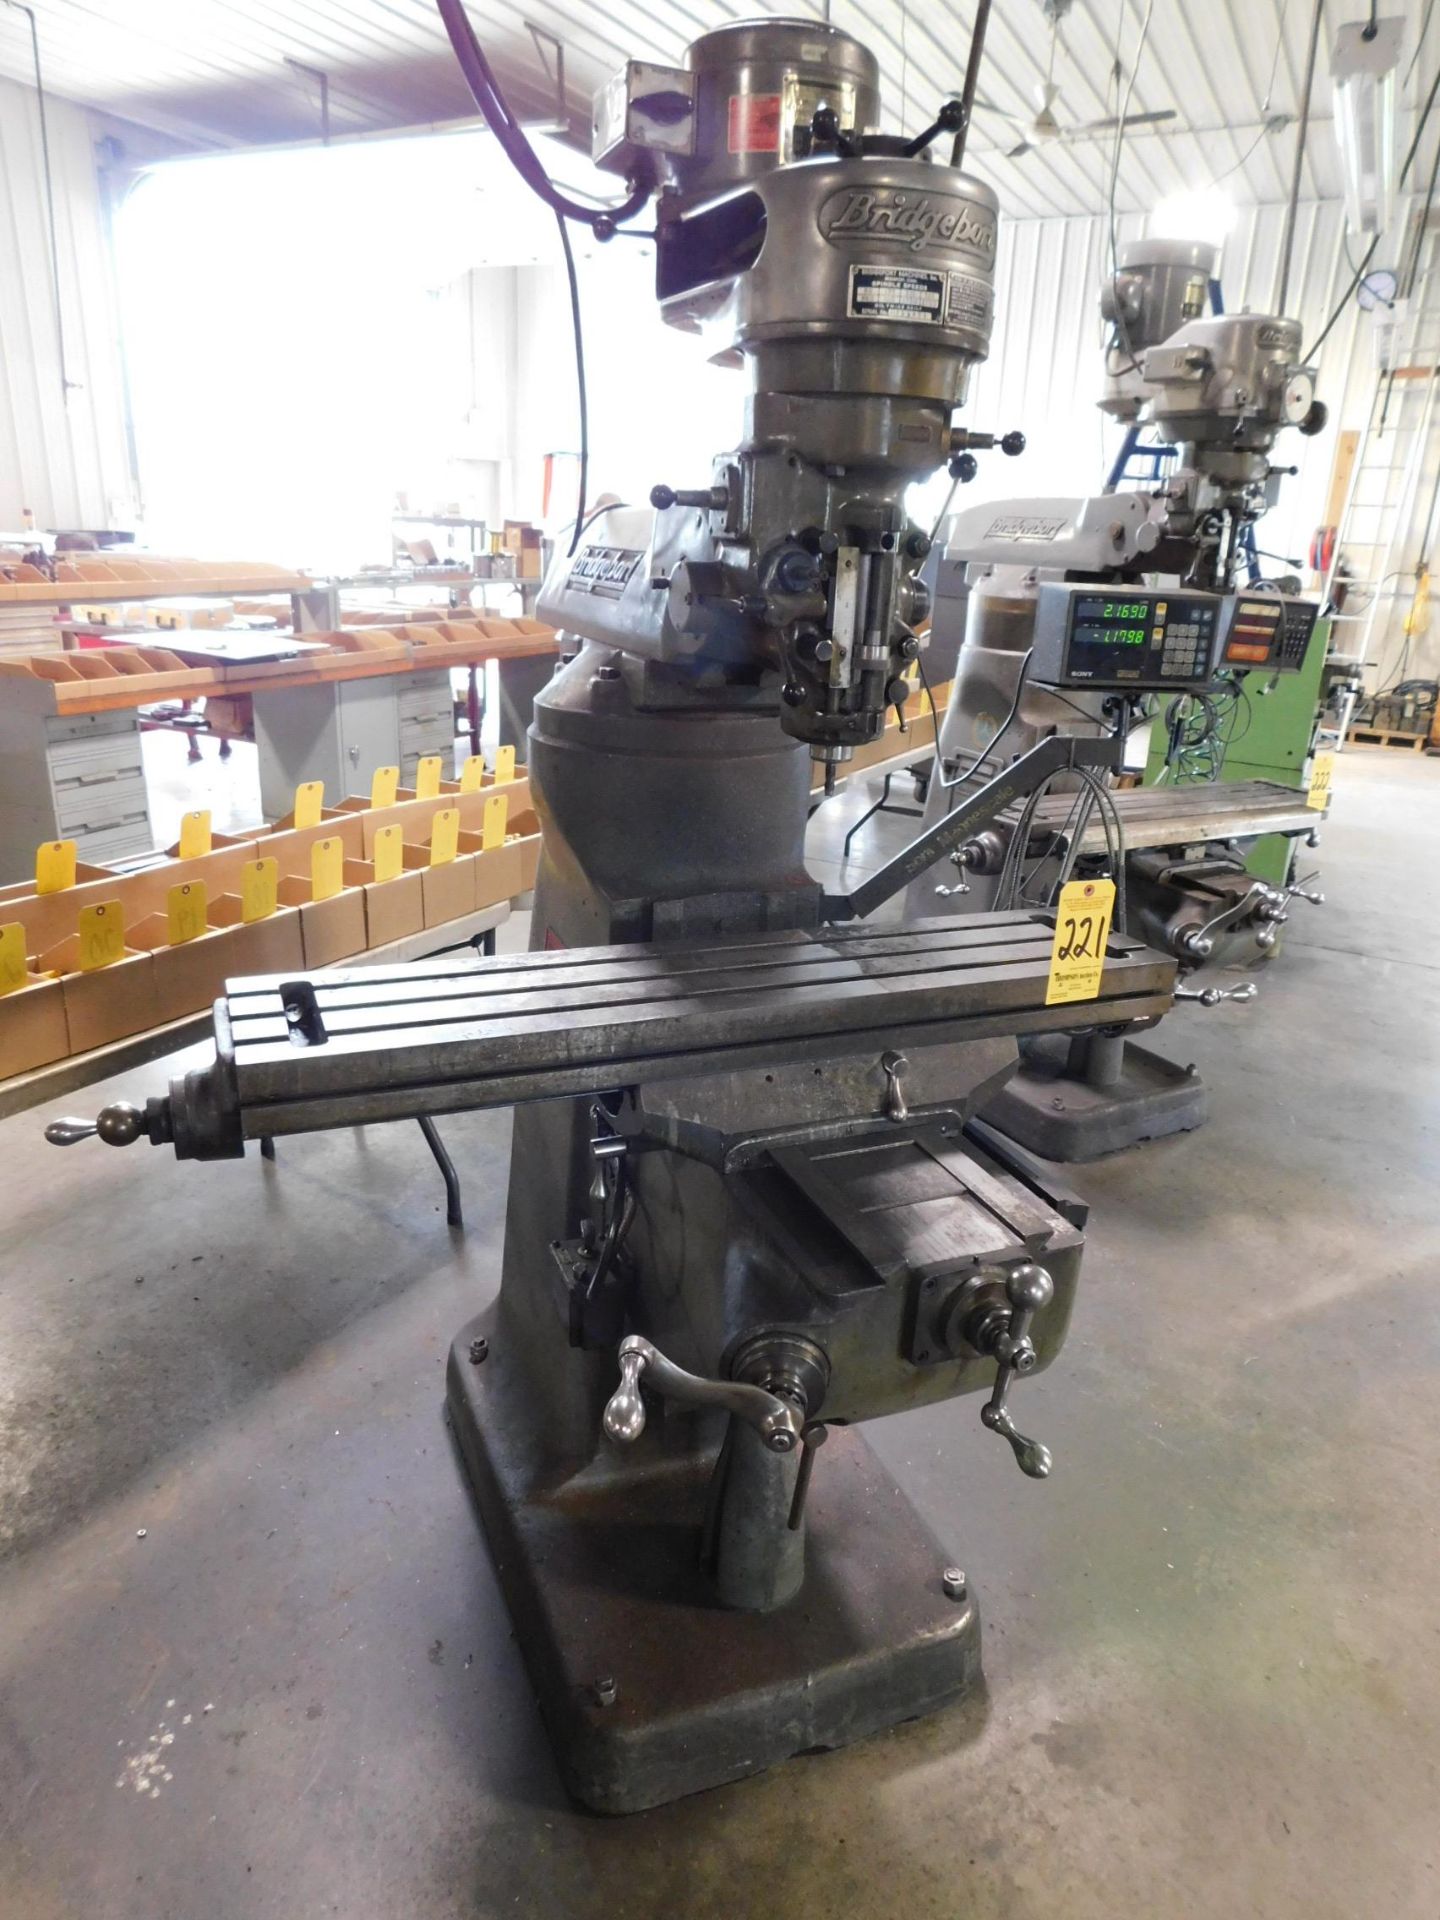 Bridgeport 1H.P. Step Pulley Vertical Mill sn#12BR139963, 9"X42" Table, R-8 Collets, Sony 2-Axis